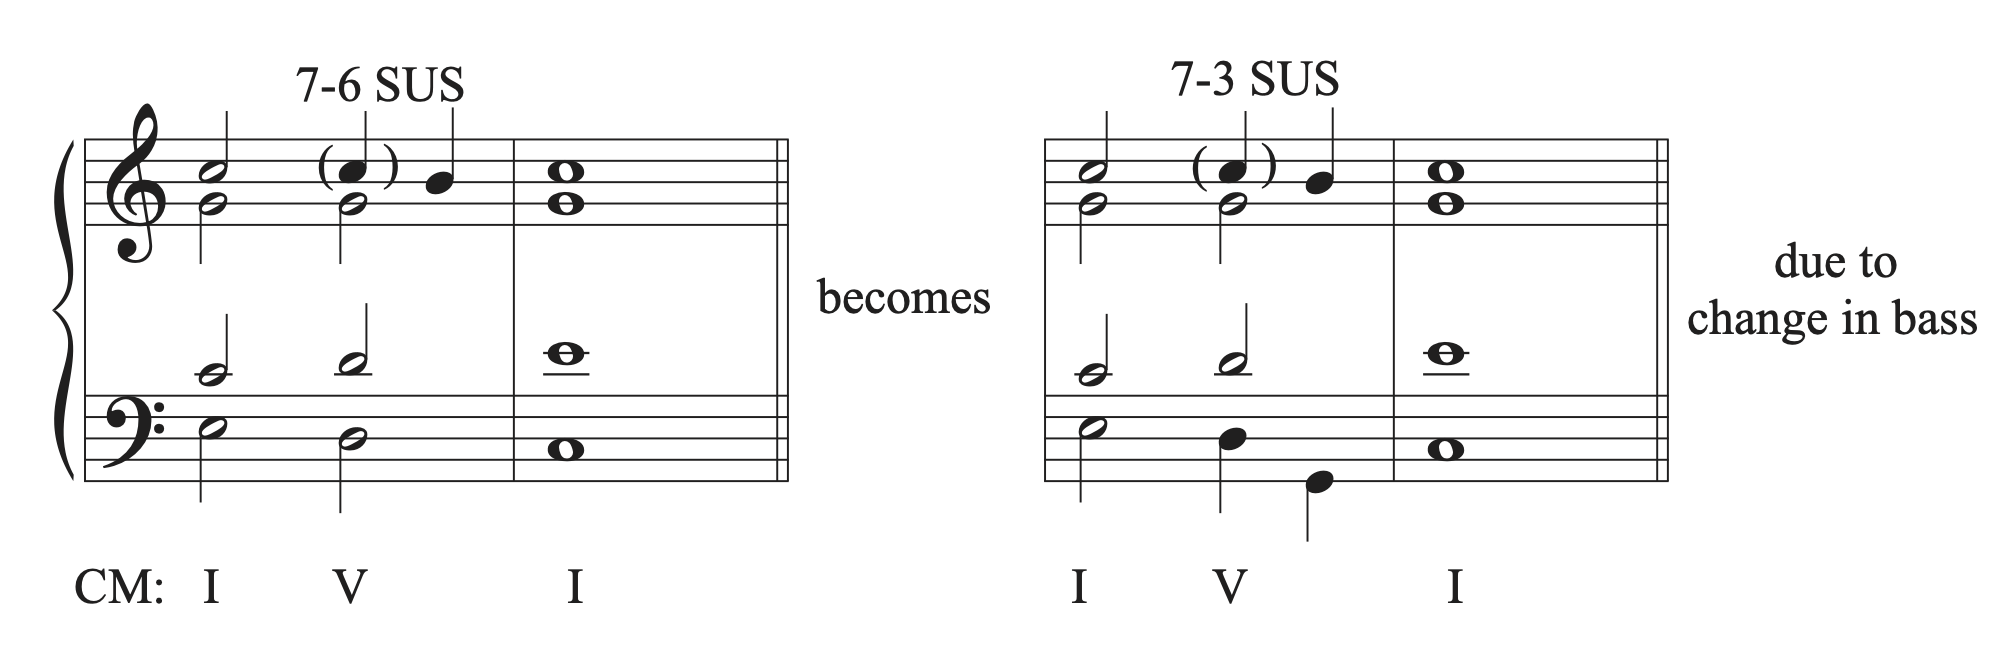 A musical example showing suspensions with a change in the bass.